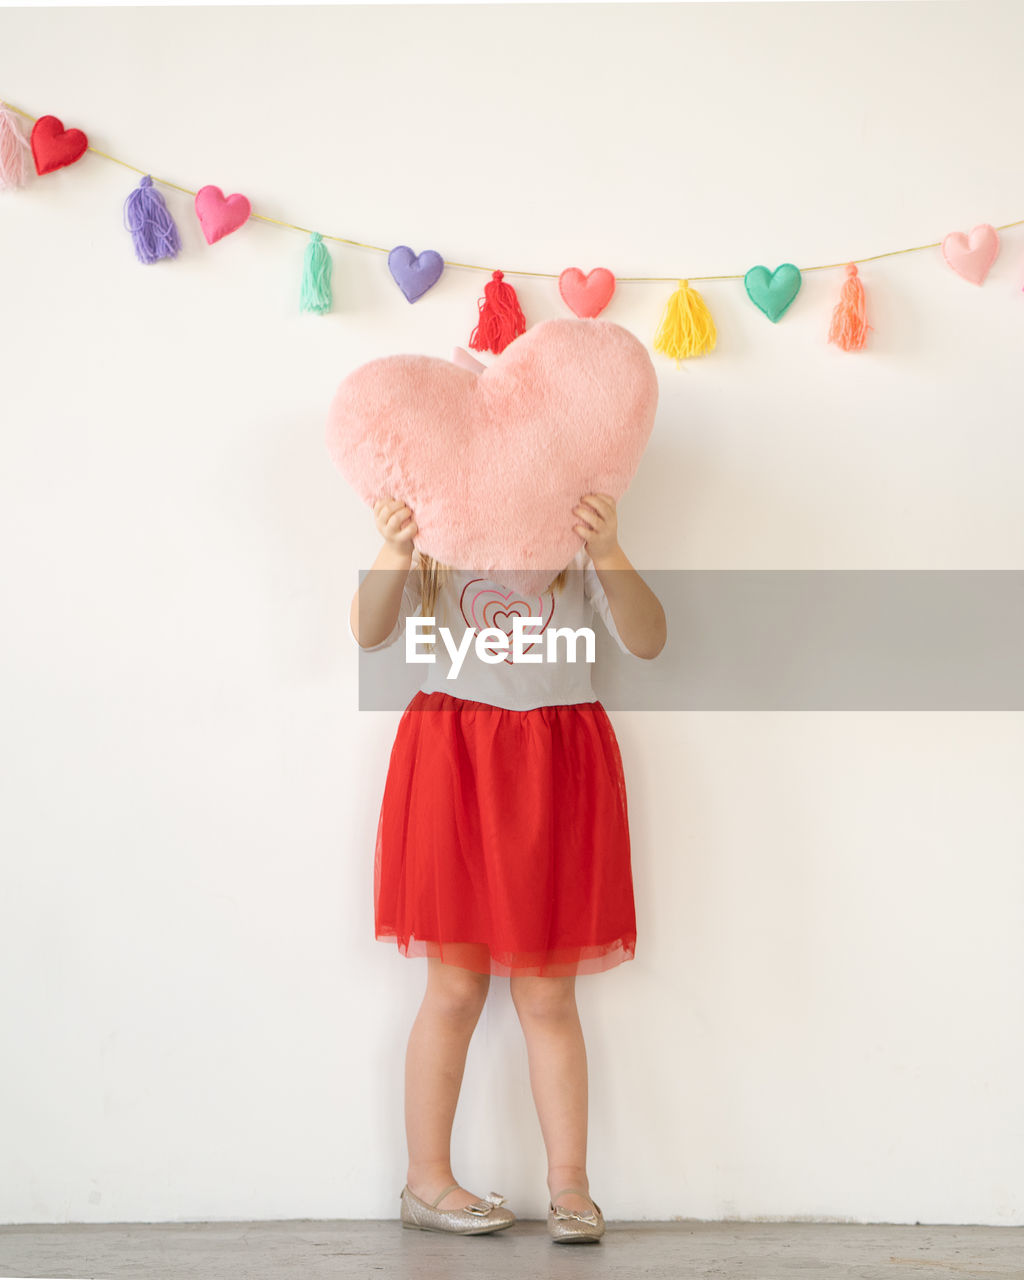 Little girl in red tutu holding pink plush heart pillow over face